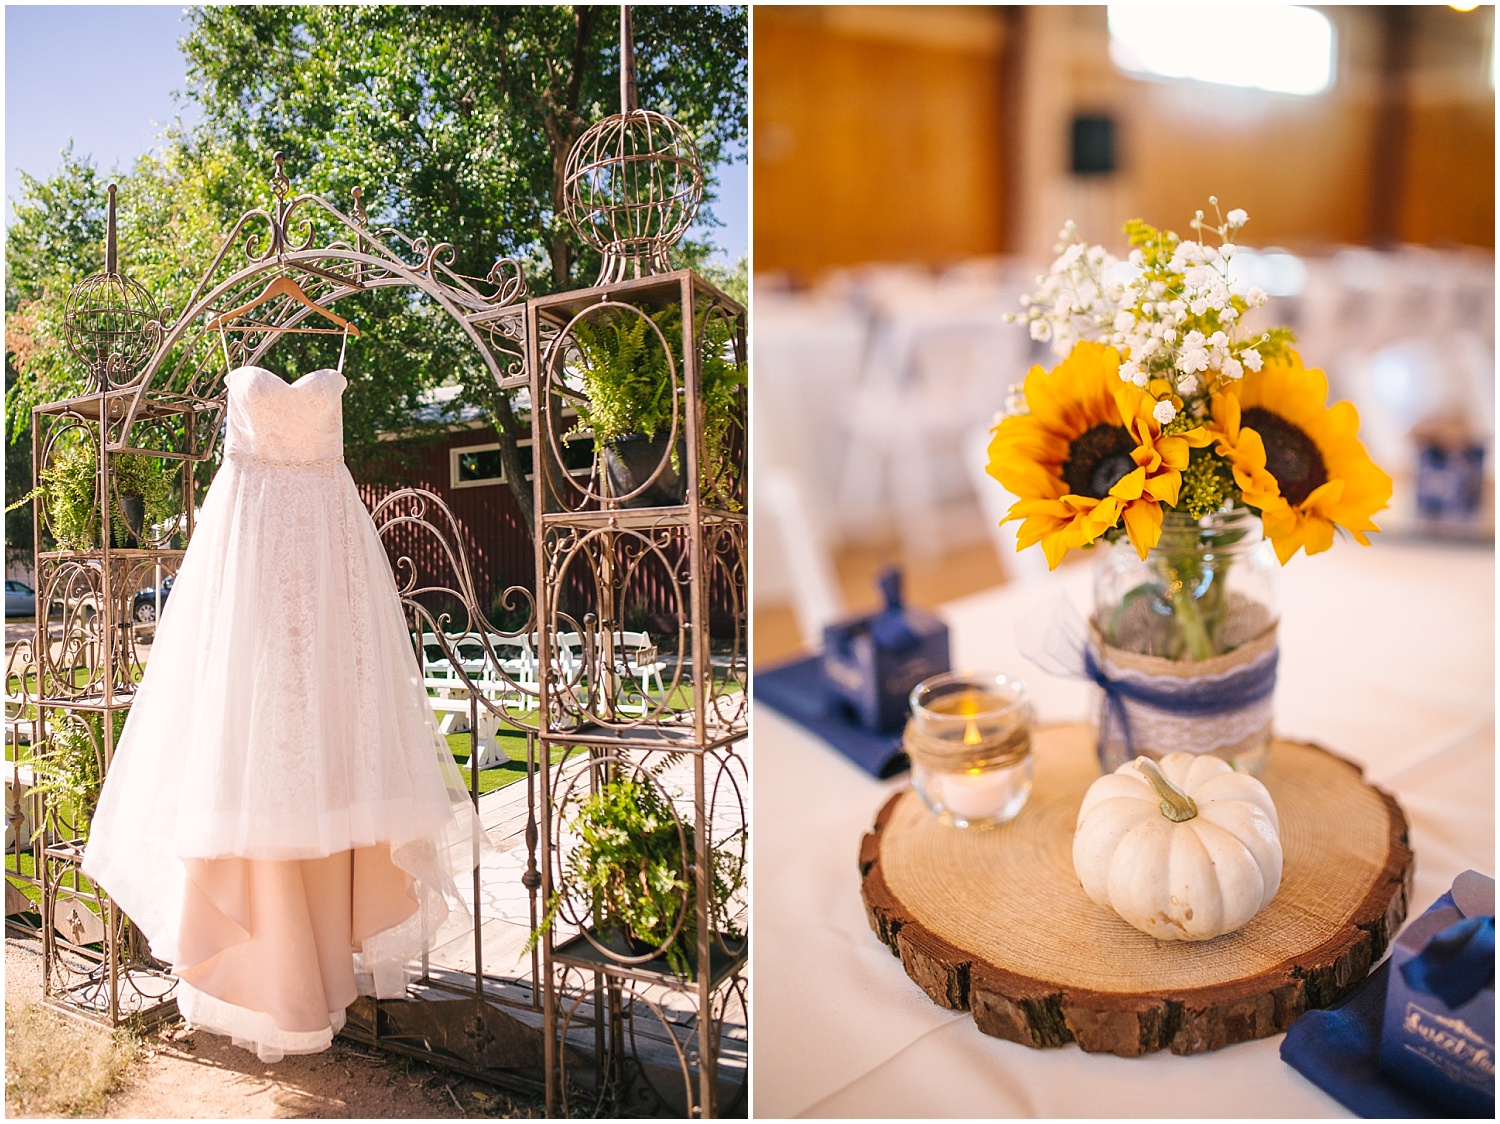 Wedding dress and sunflower bouquets at Rustic Lace Barn venue